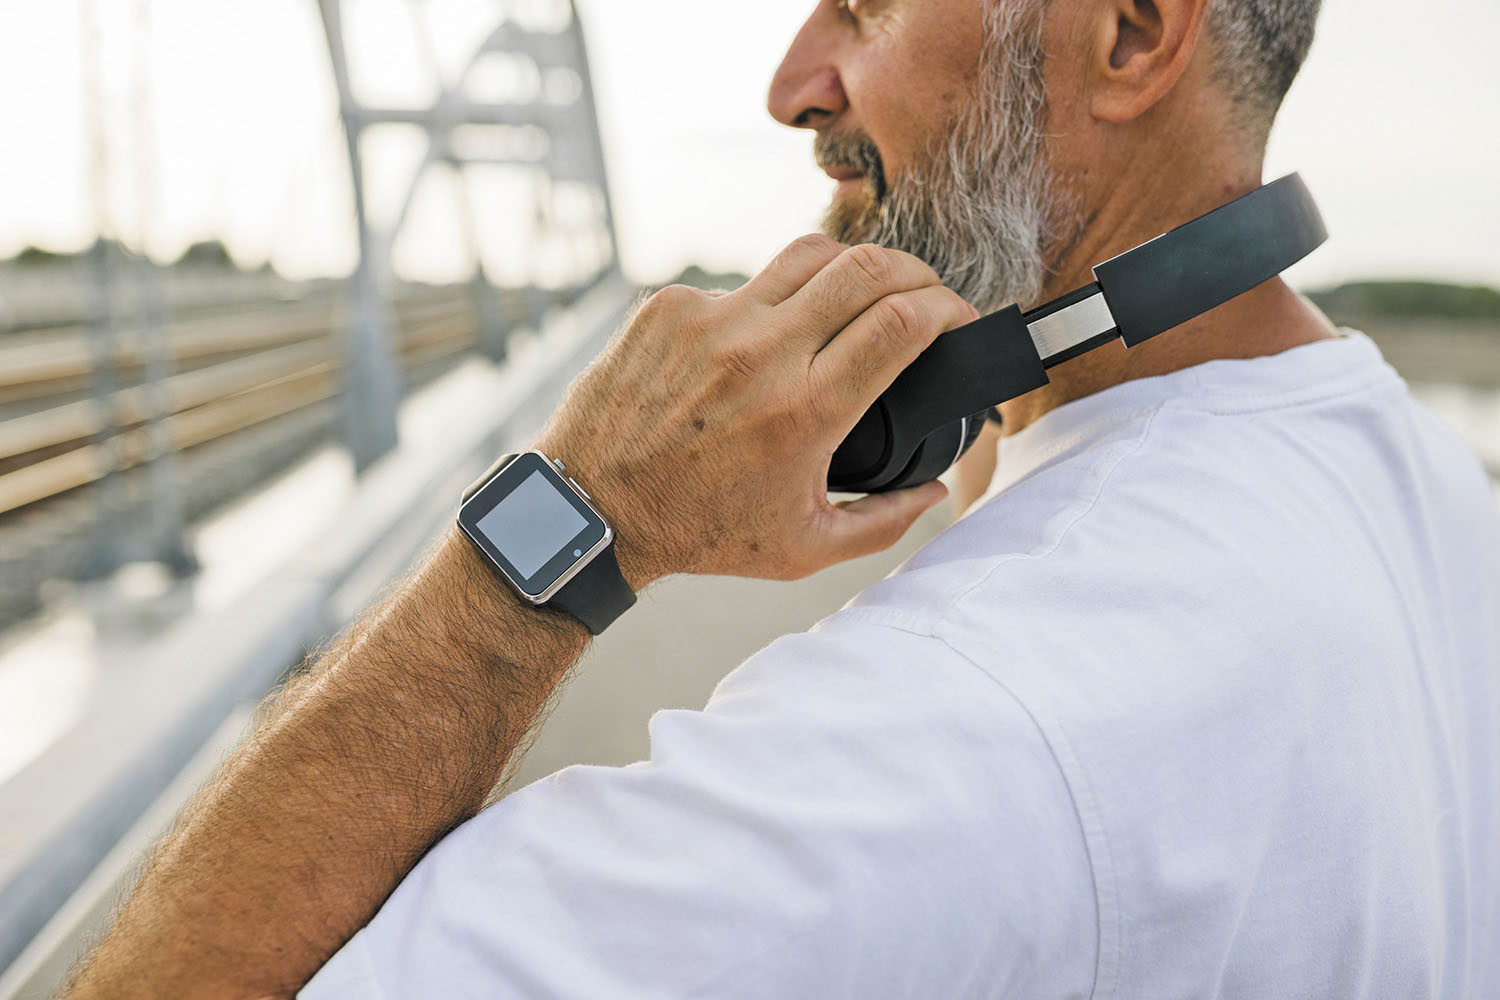 photo of a man grasping his headphones as he prepares to run outdoors; a smartwatch is visible on his left wrist